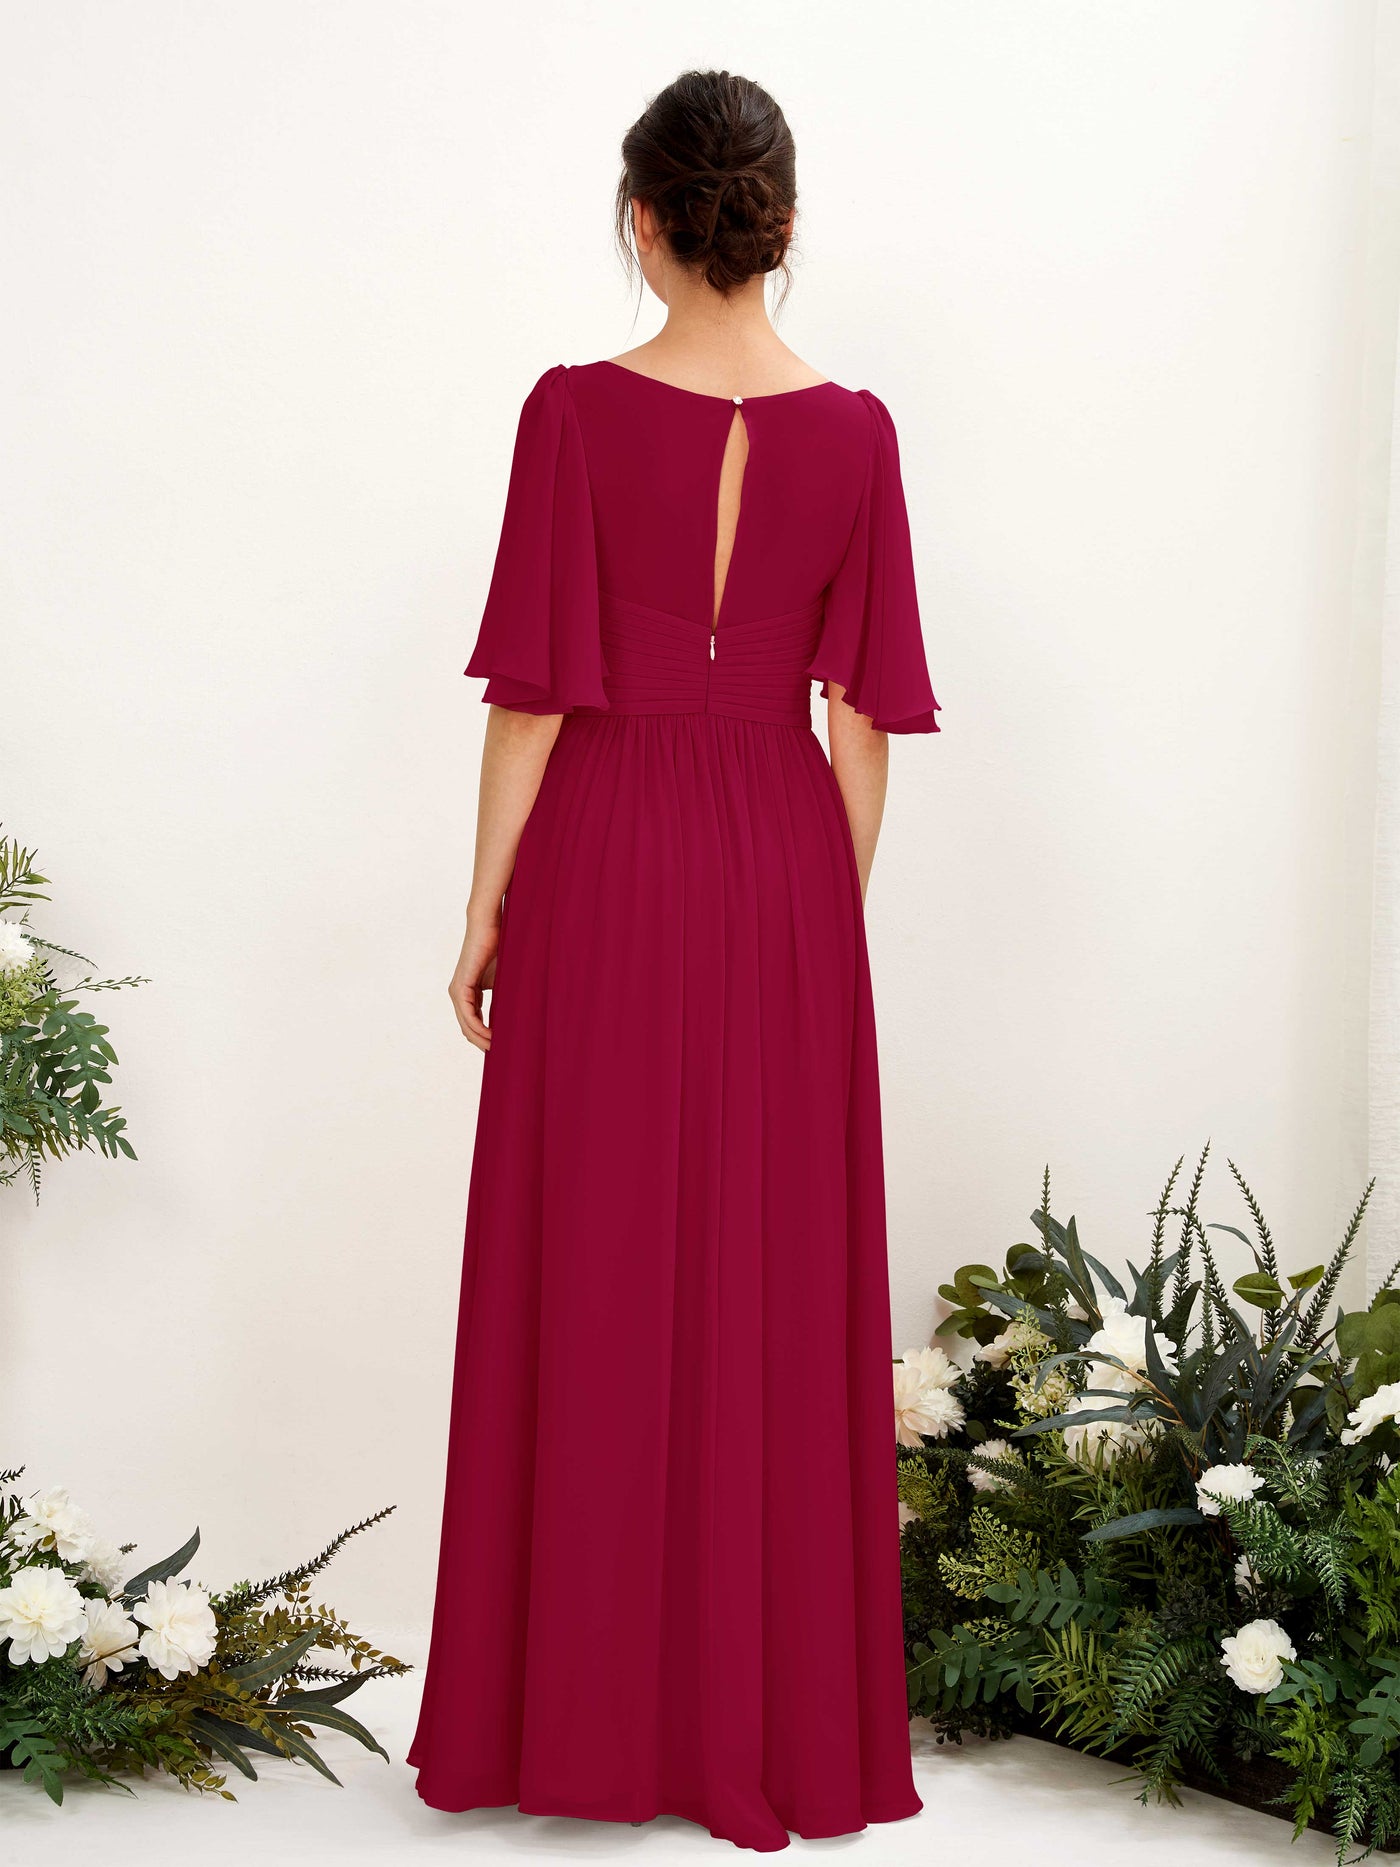 Jester Red Bridesmaid Dresses Bridesmaid Dress A-line Chiffon V-neck Full Length 1/2 Sleeves Wedding Party Dress (81221641)#color_jester-red